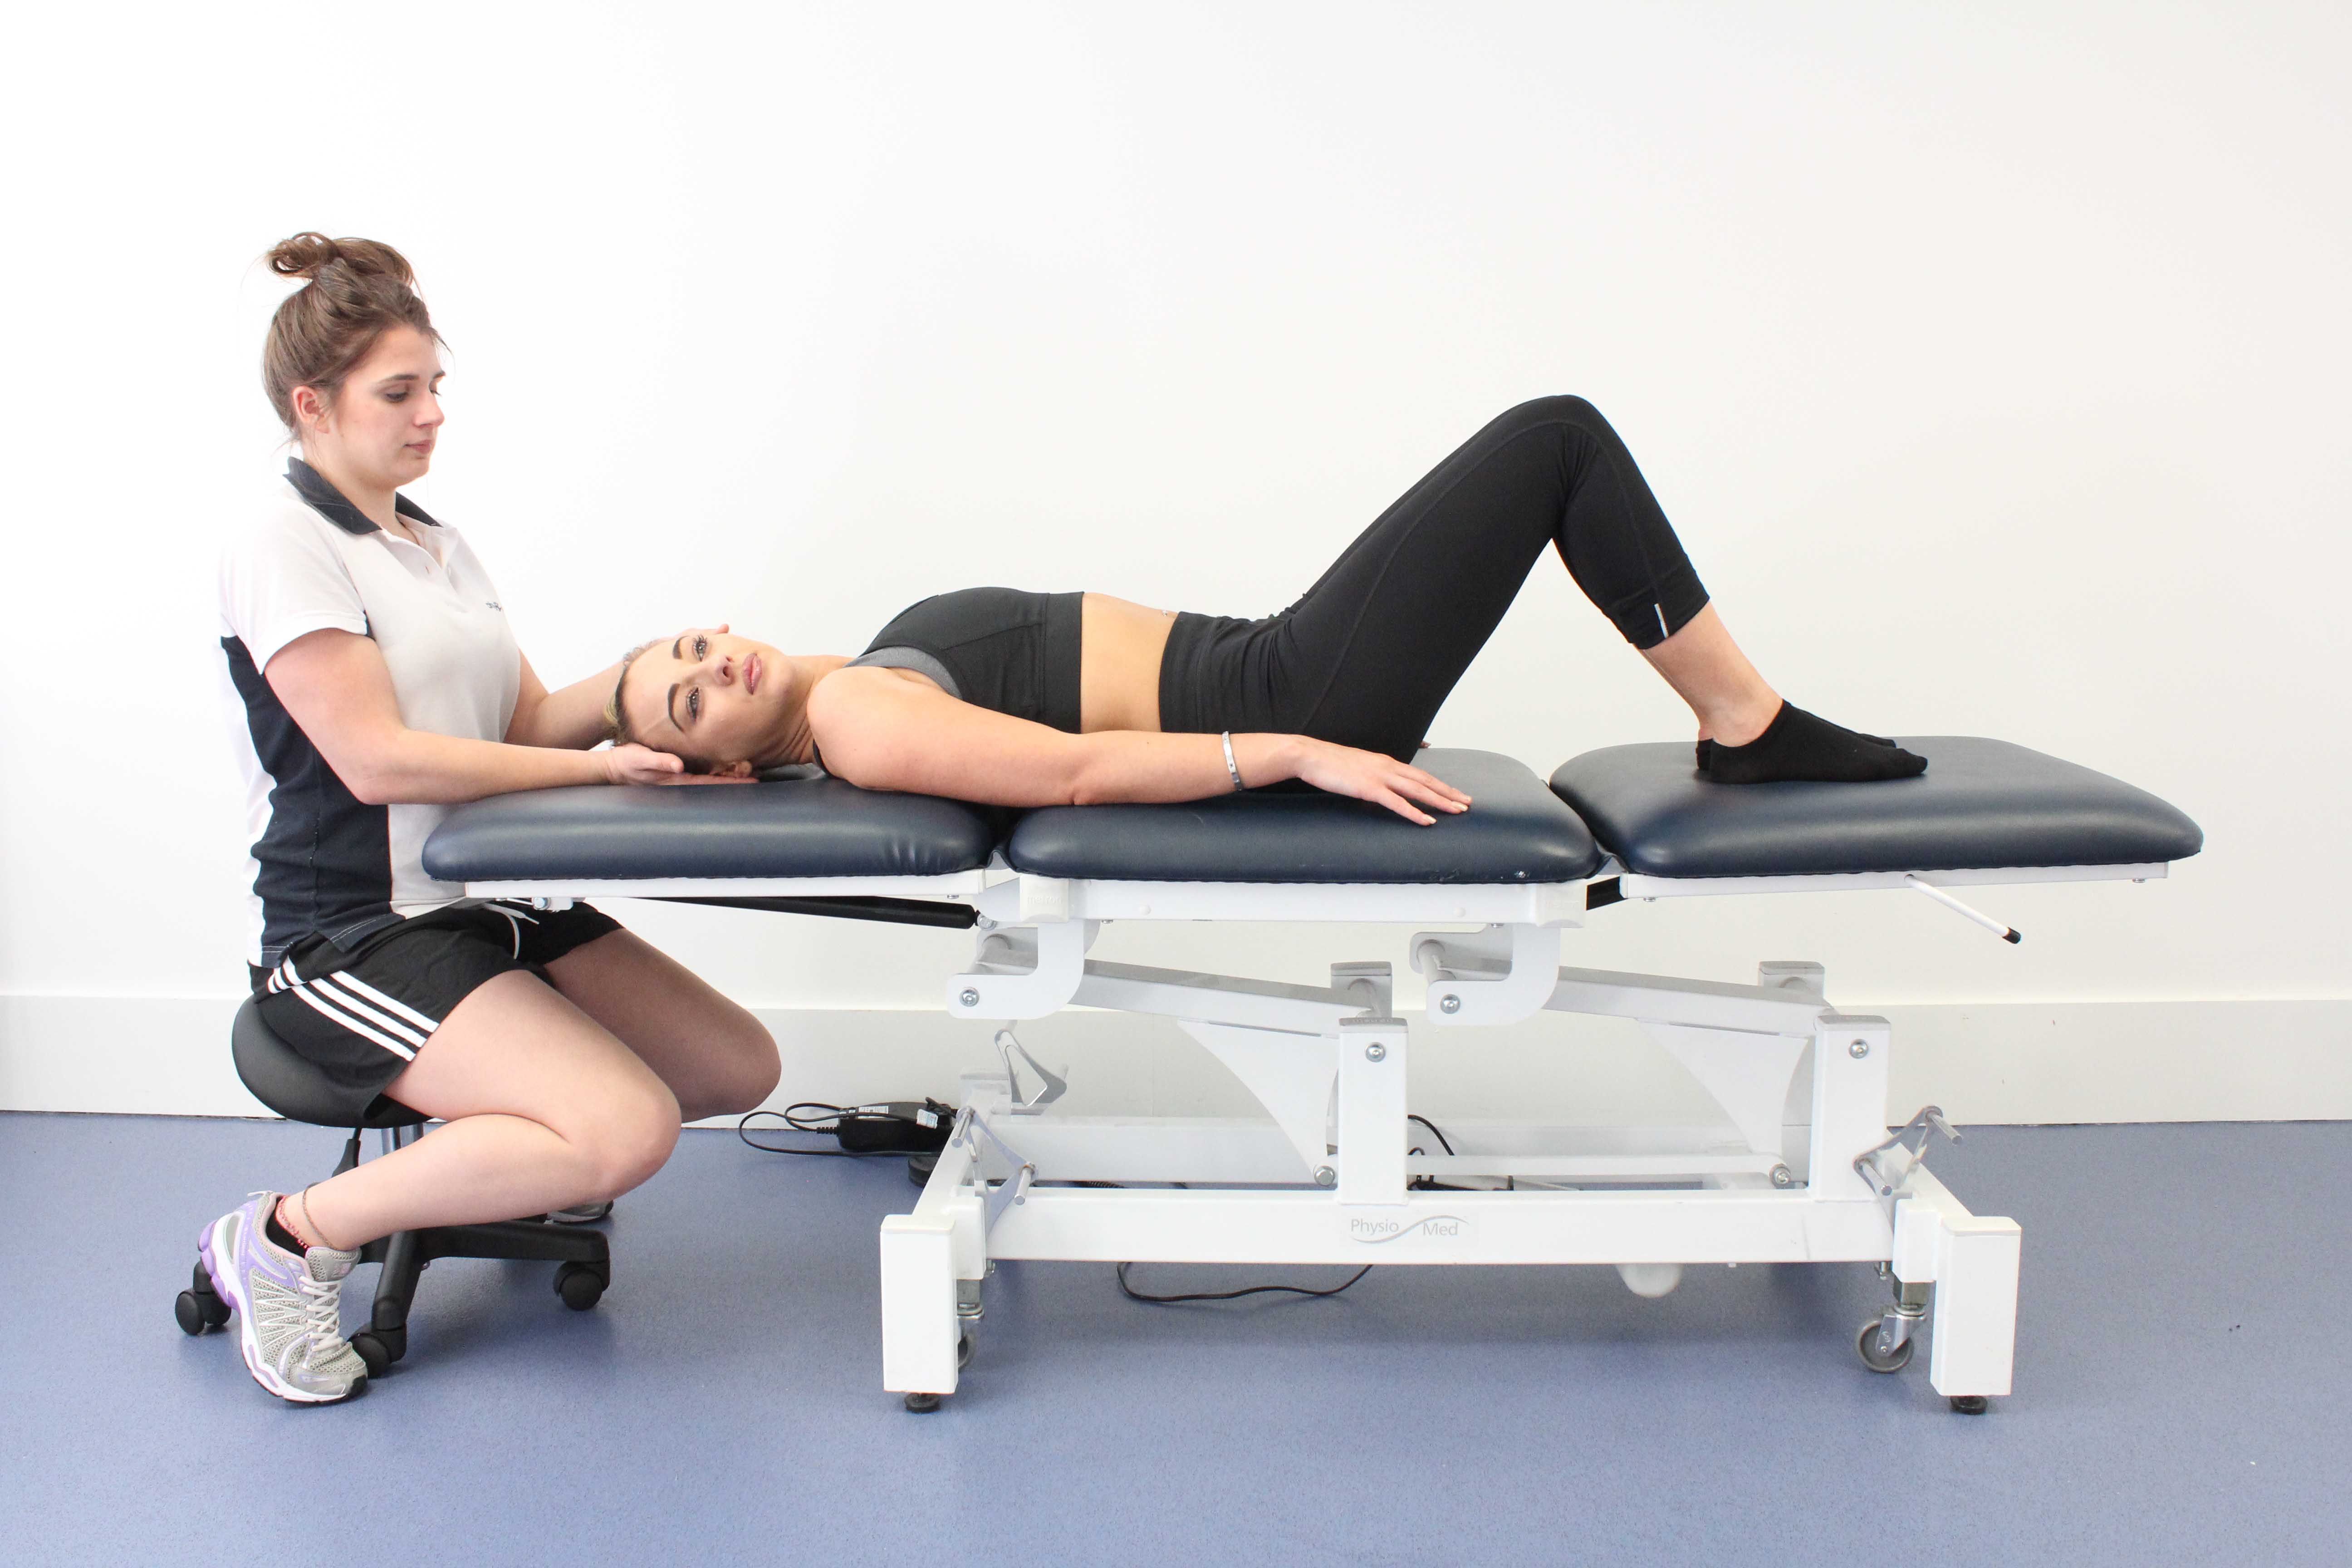 Physiotherapist performing postural realignment exercises to correct vestibular balance and dizziness conditions